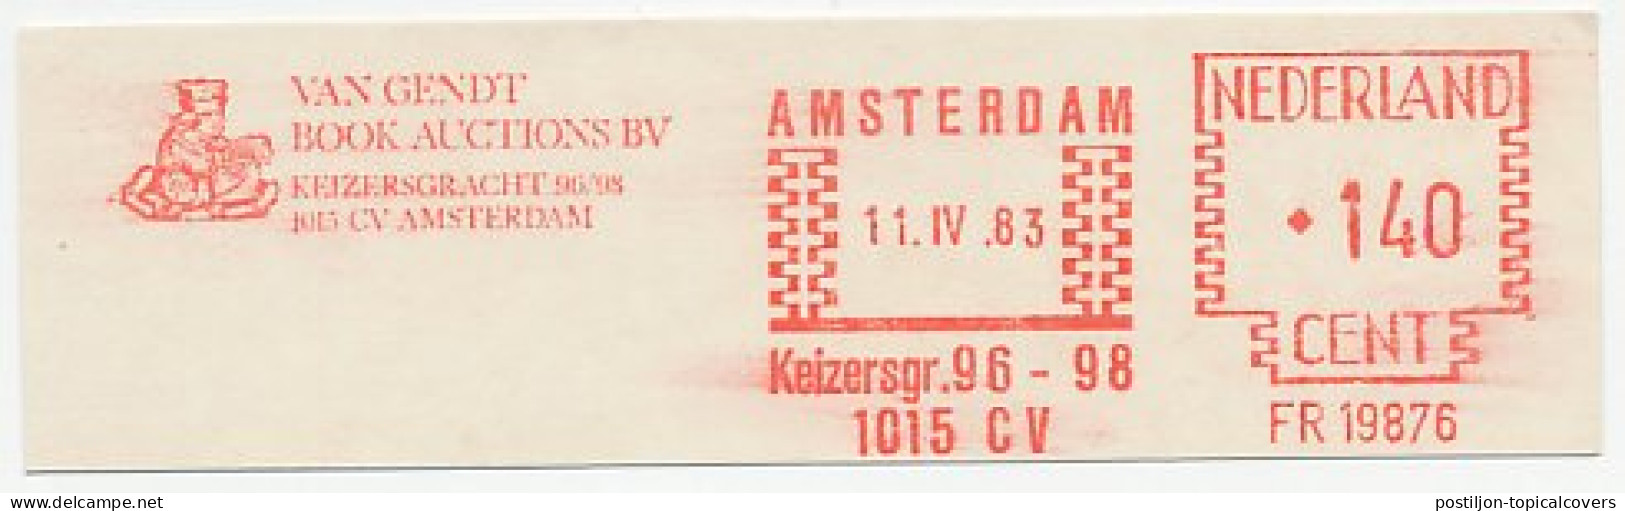 Meter Cut Netherlands 1983 Book Auctions - Unclassified